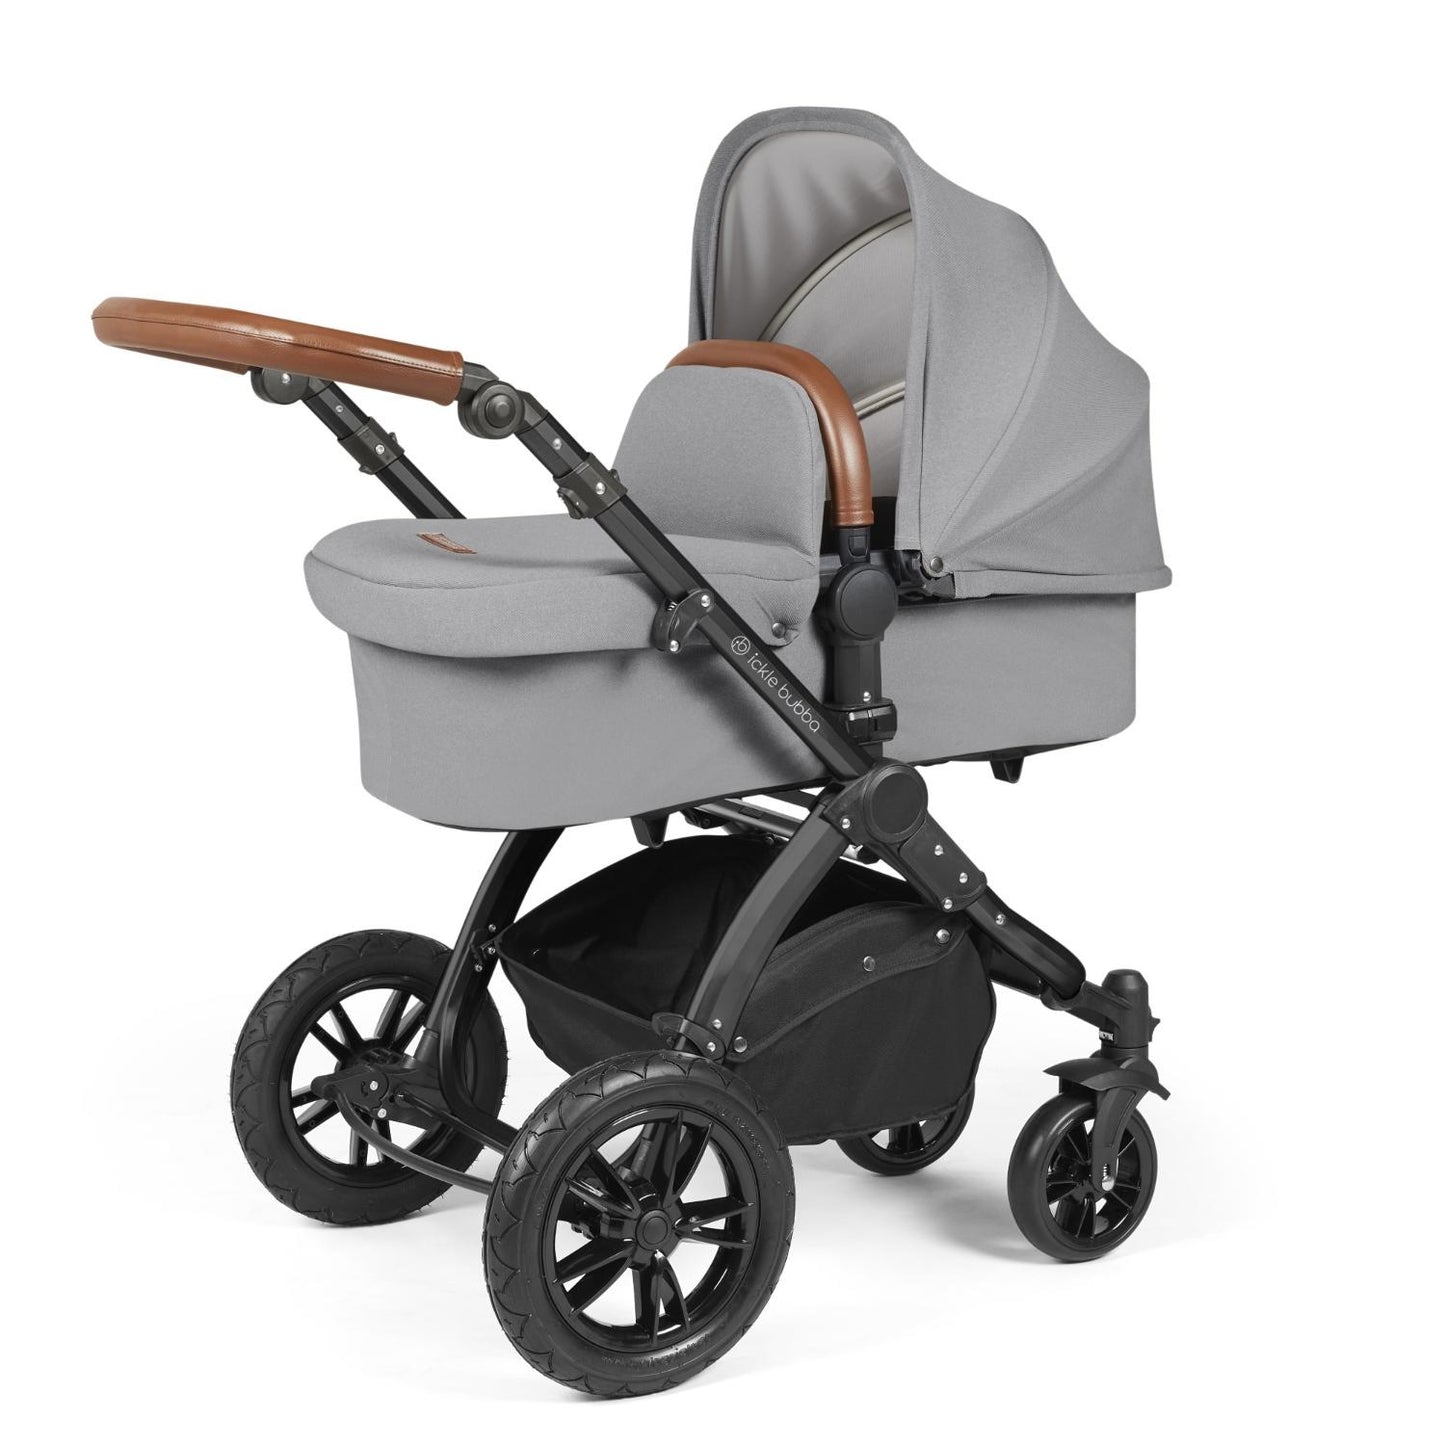 Ickle Bubba Stomp Luxe Pushchair with carrycot attached in Pearl Grey colour with tan handle